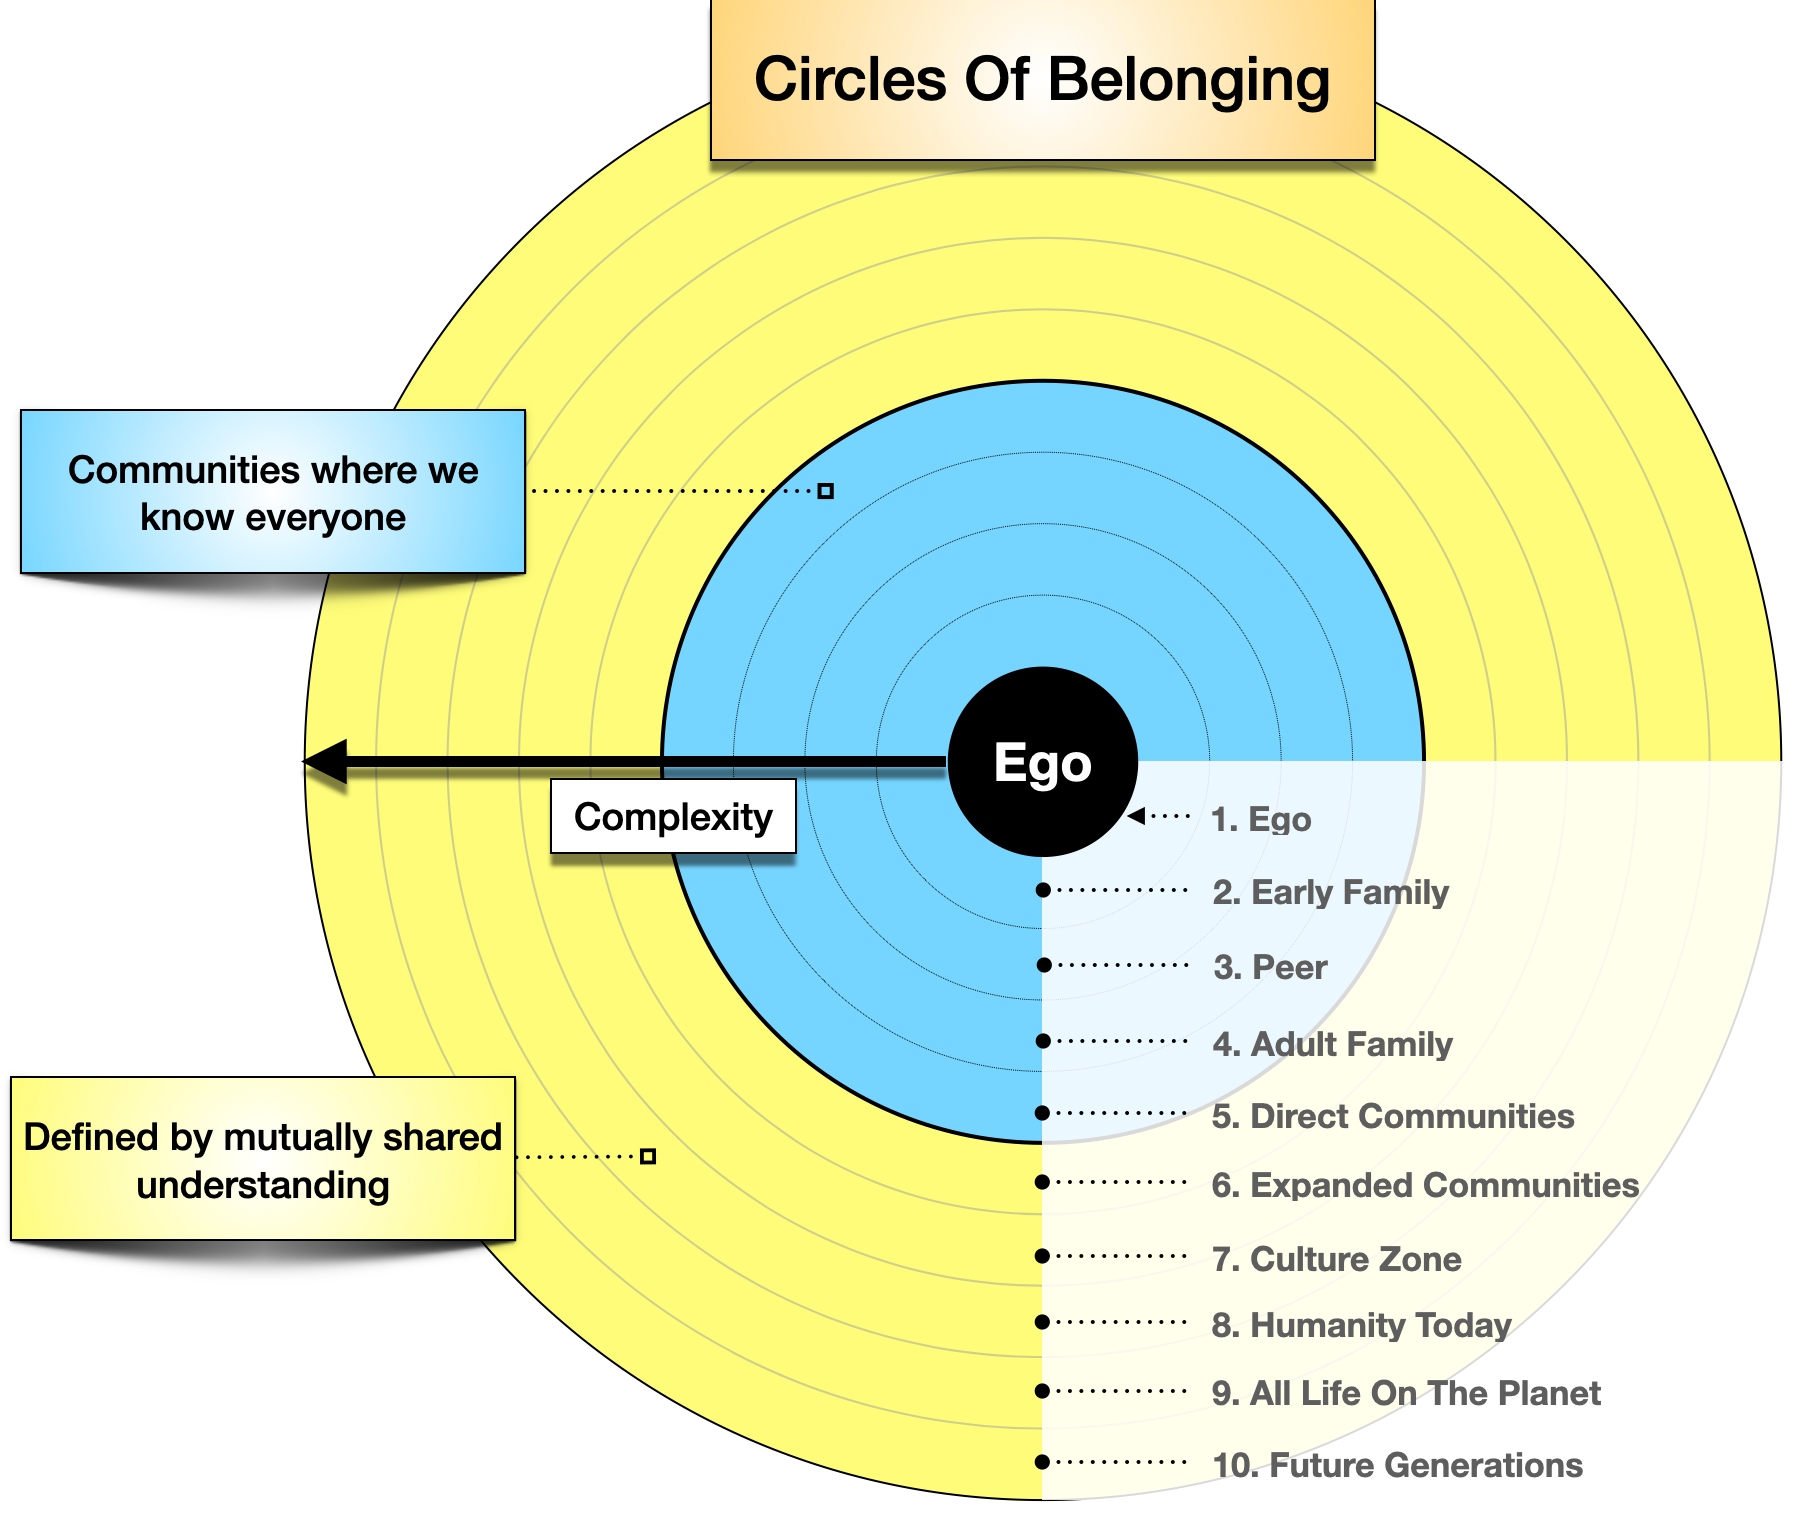 10 circles representing a widening populace starting with the self and expanding to all future generations and life on the planet